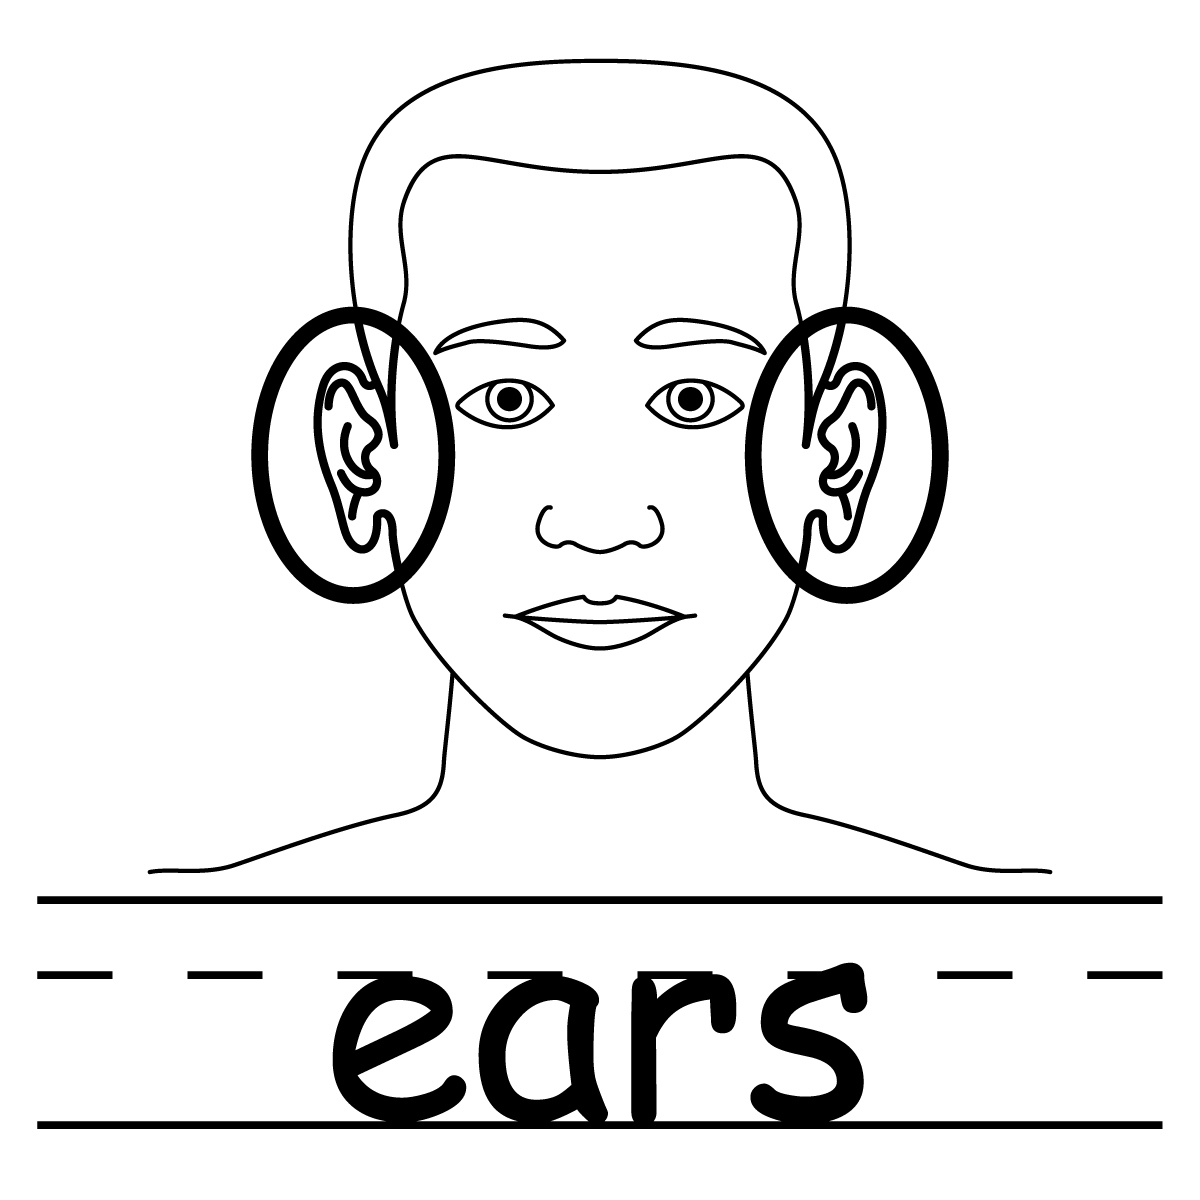 2 Ears Clipart Black And White - Free Clipart Images